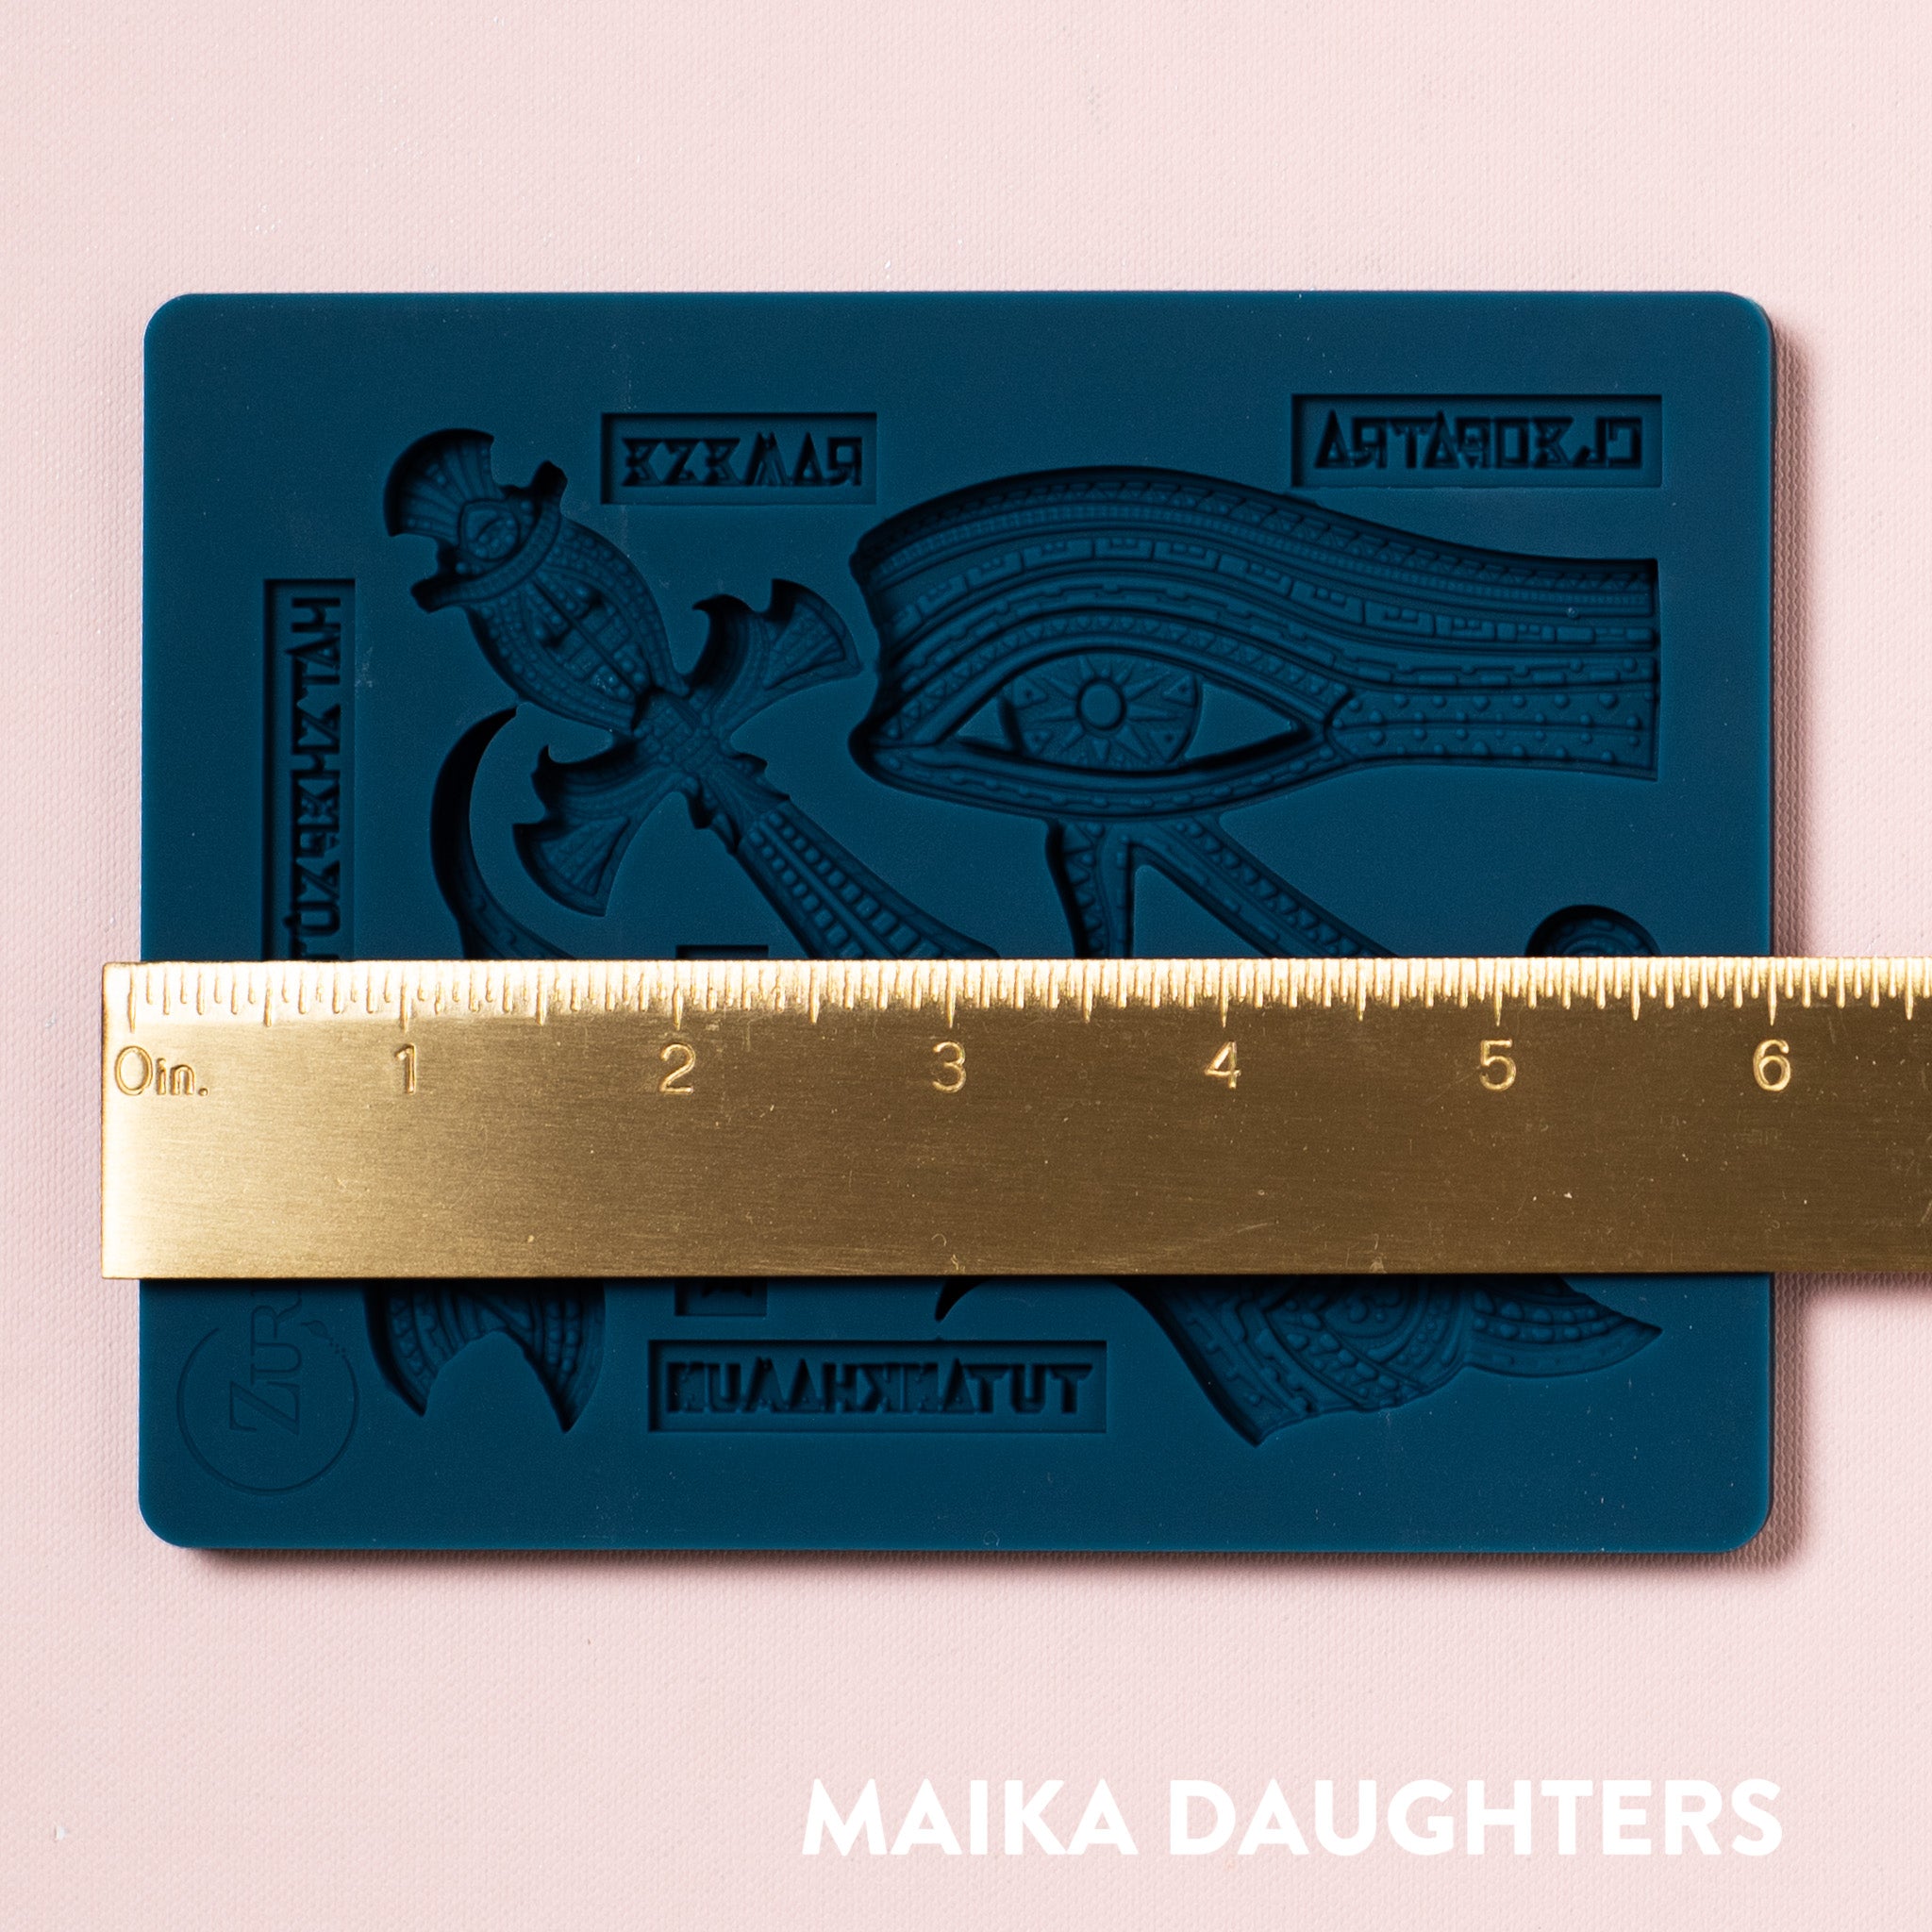 A blue silicone mold of Zuri's Eyptian Motifs is on a light pink background. A gold ruler showing the measurement of 6 inches sits on the mold.